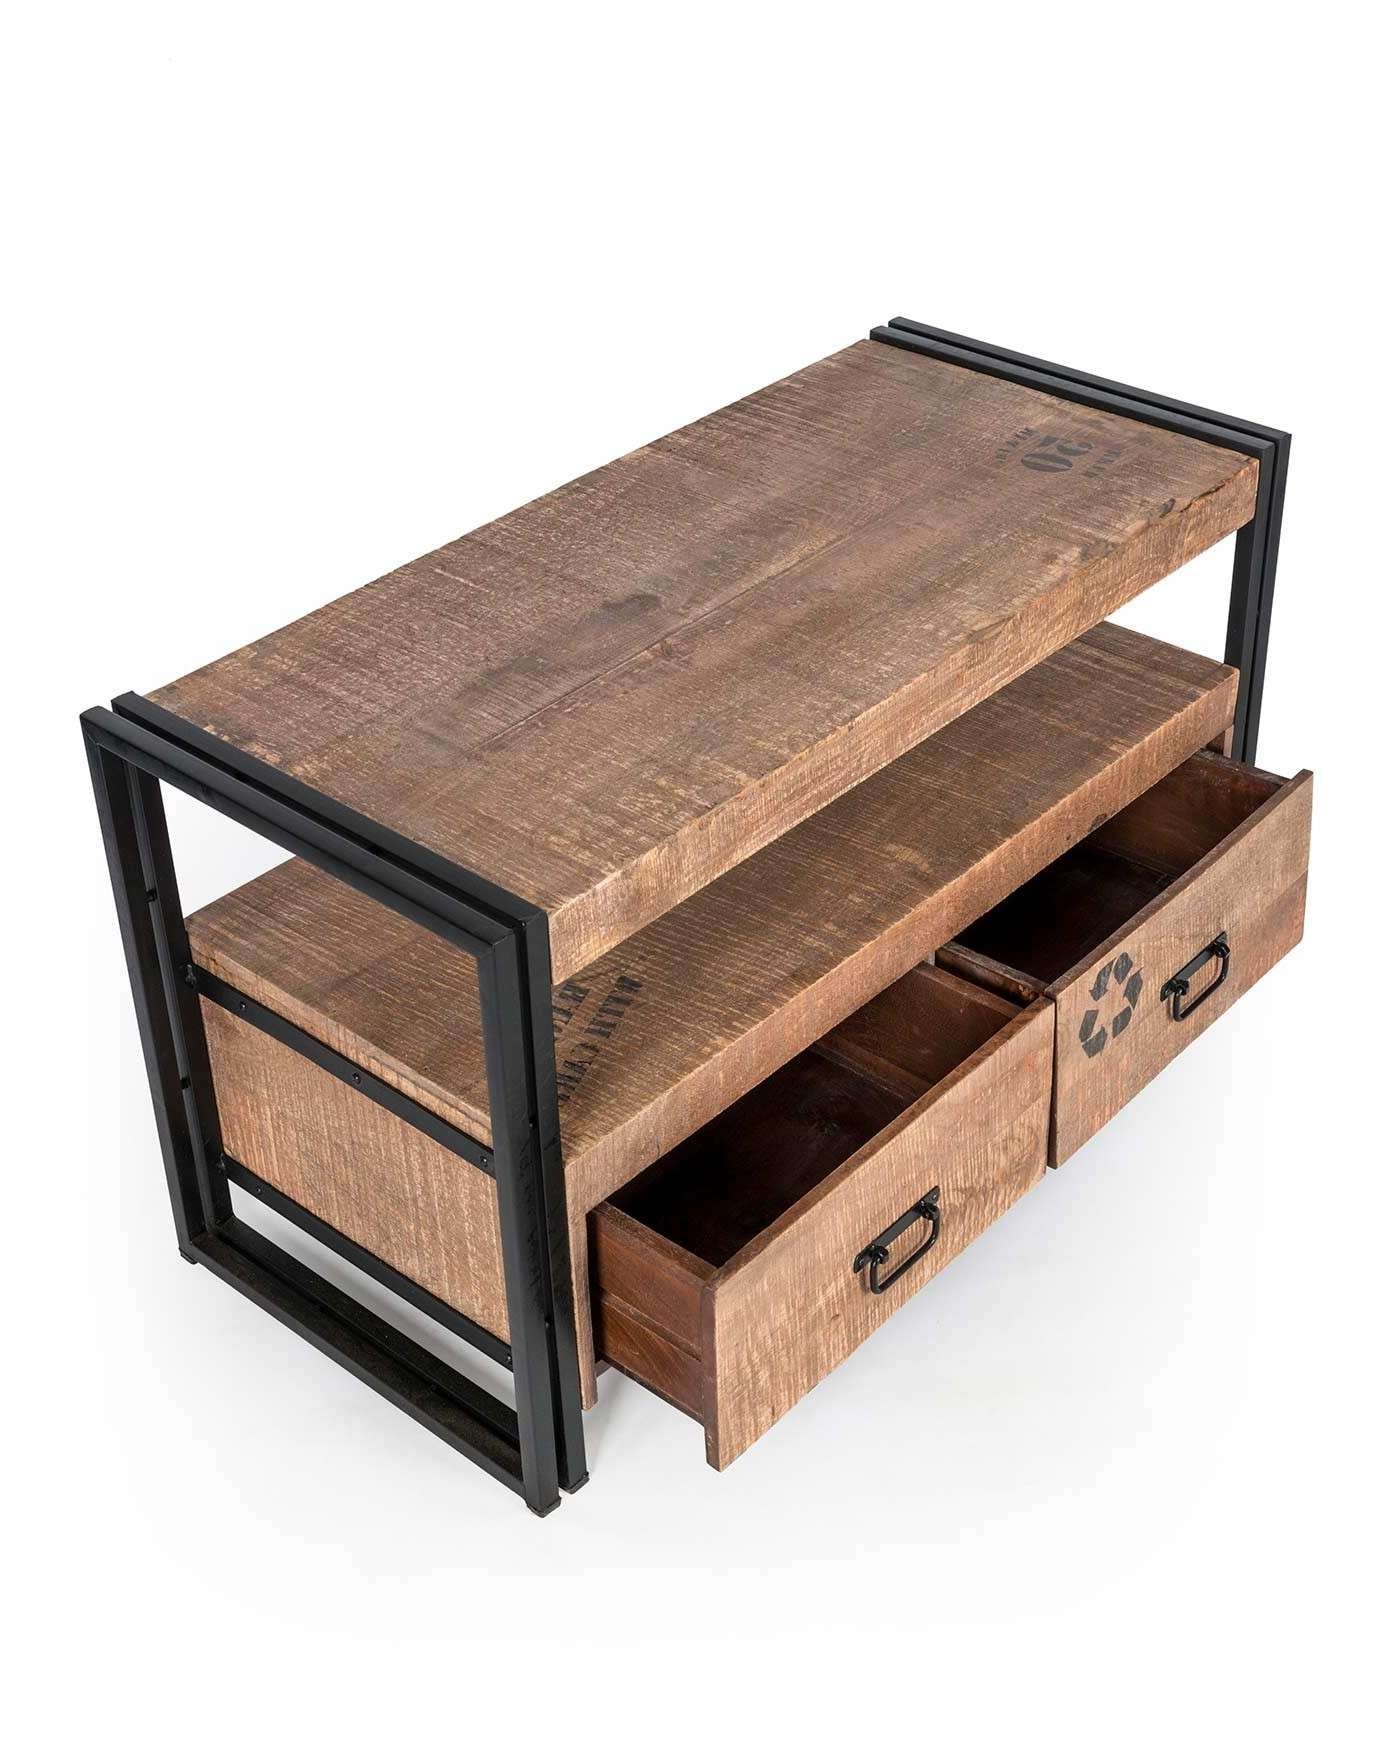 Reclaimed Wood Tv Stand Industrial Furniture Range – Homescapes Regarding Recycled Wood Tv Stands (View 5 of 15)